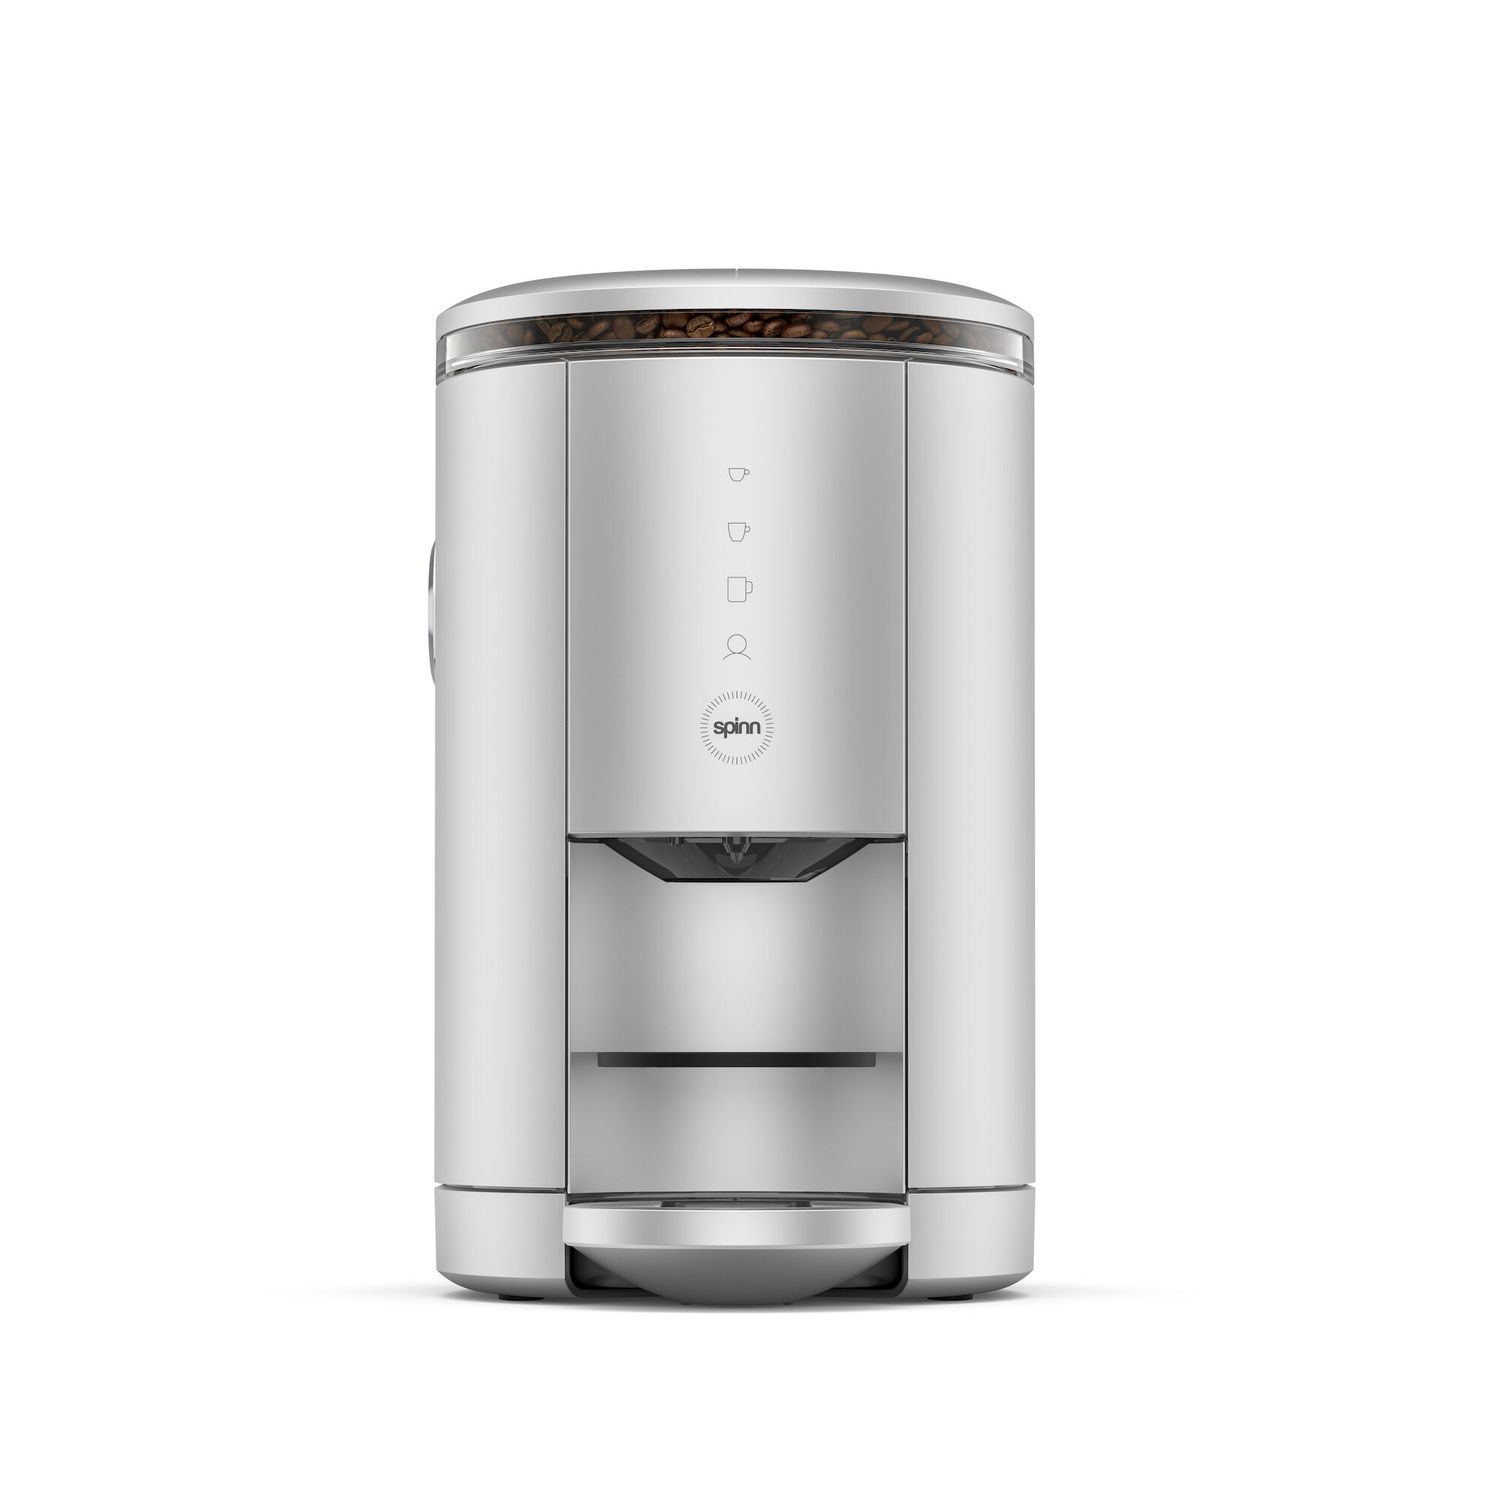 a cylindrical coffee maker on a white background